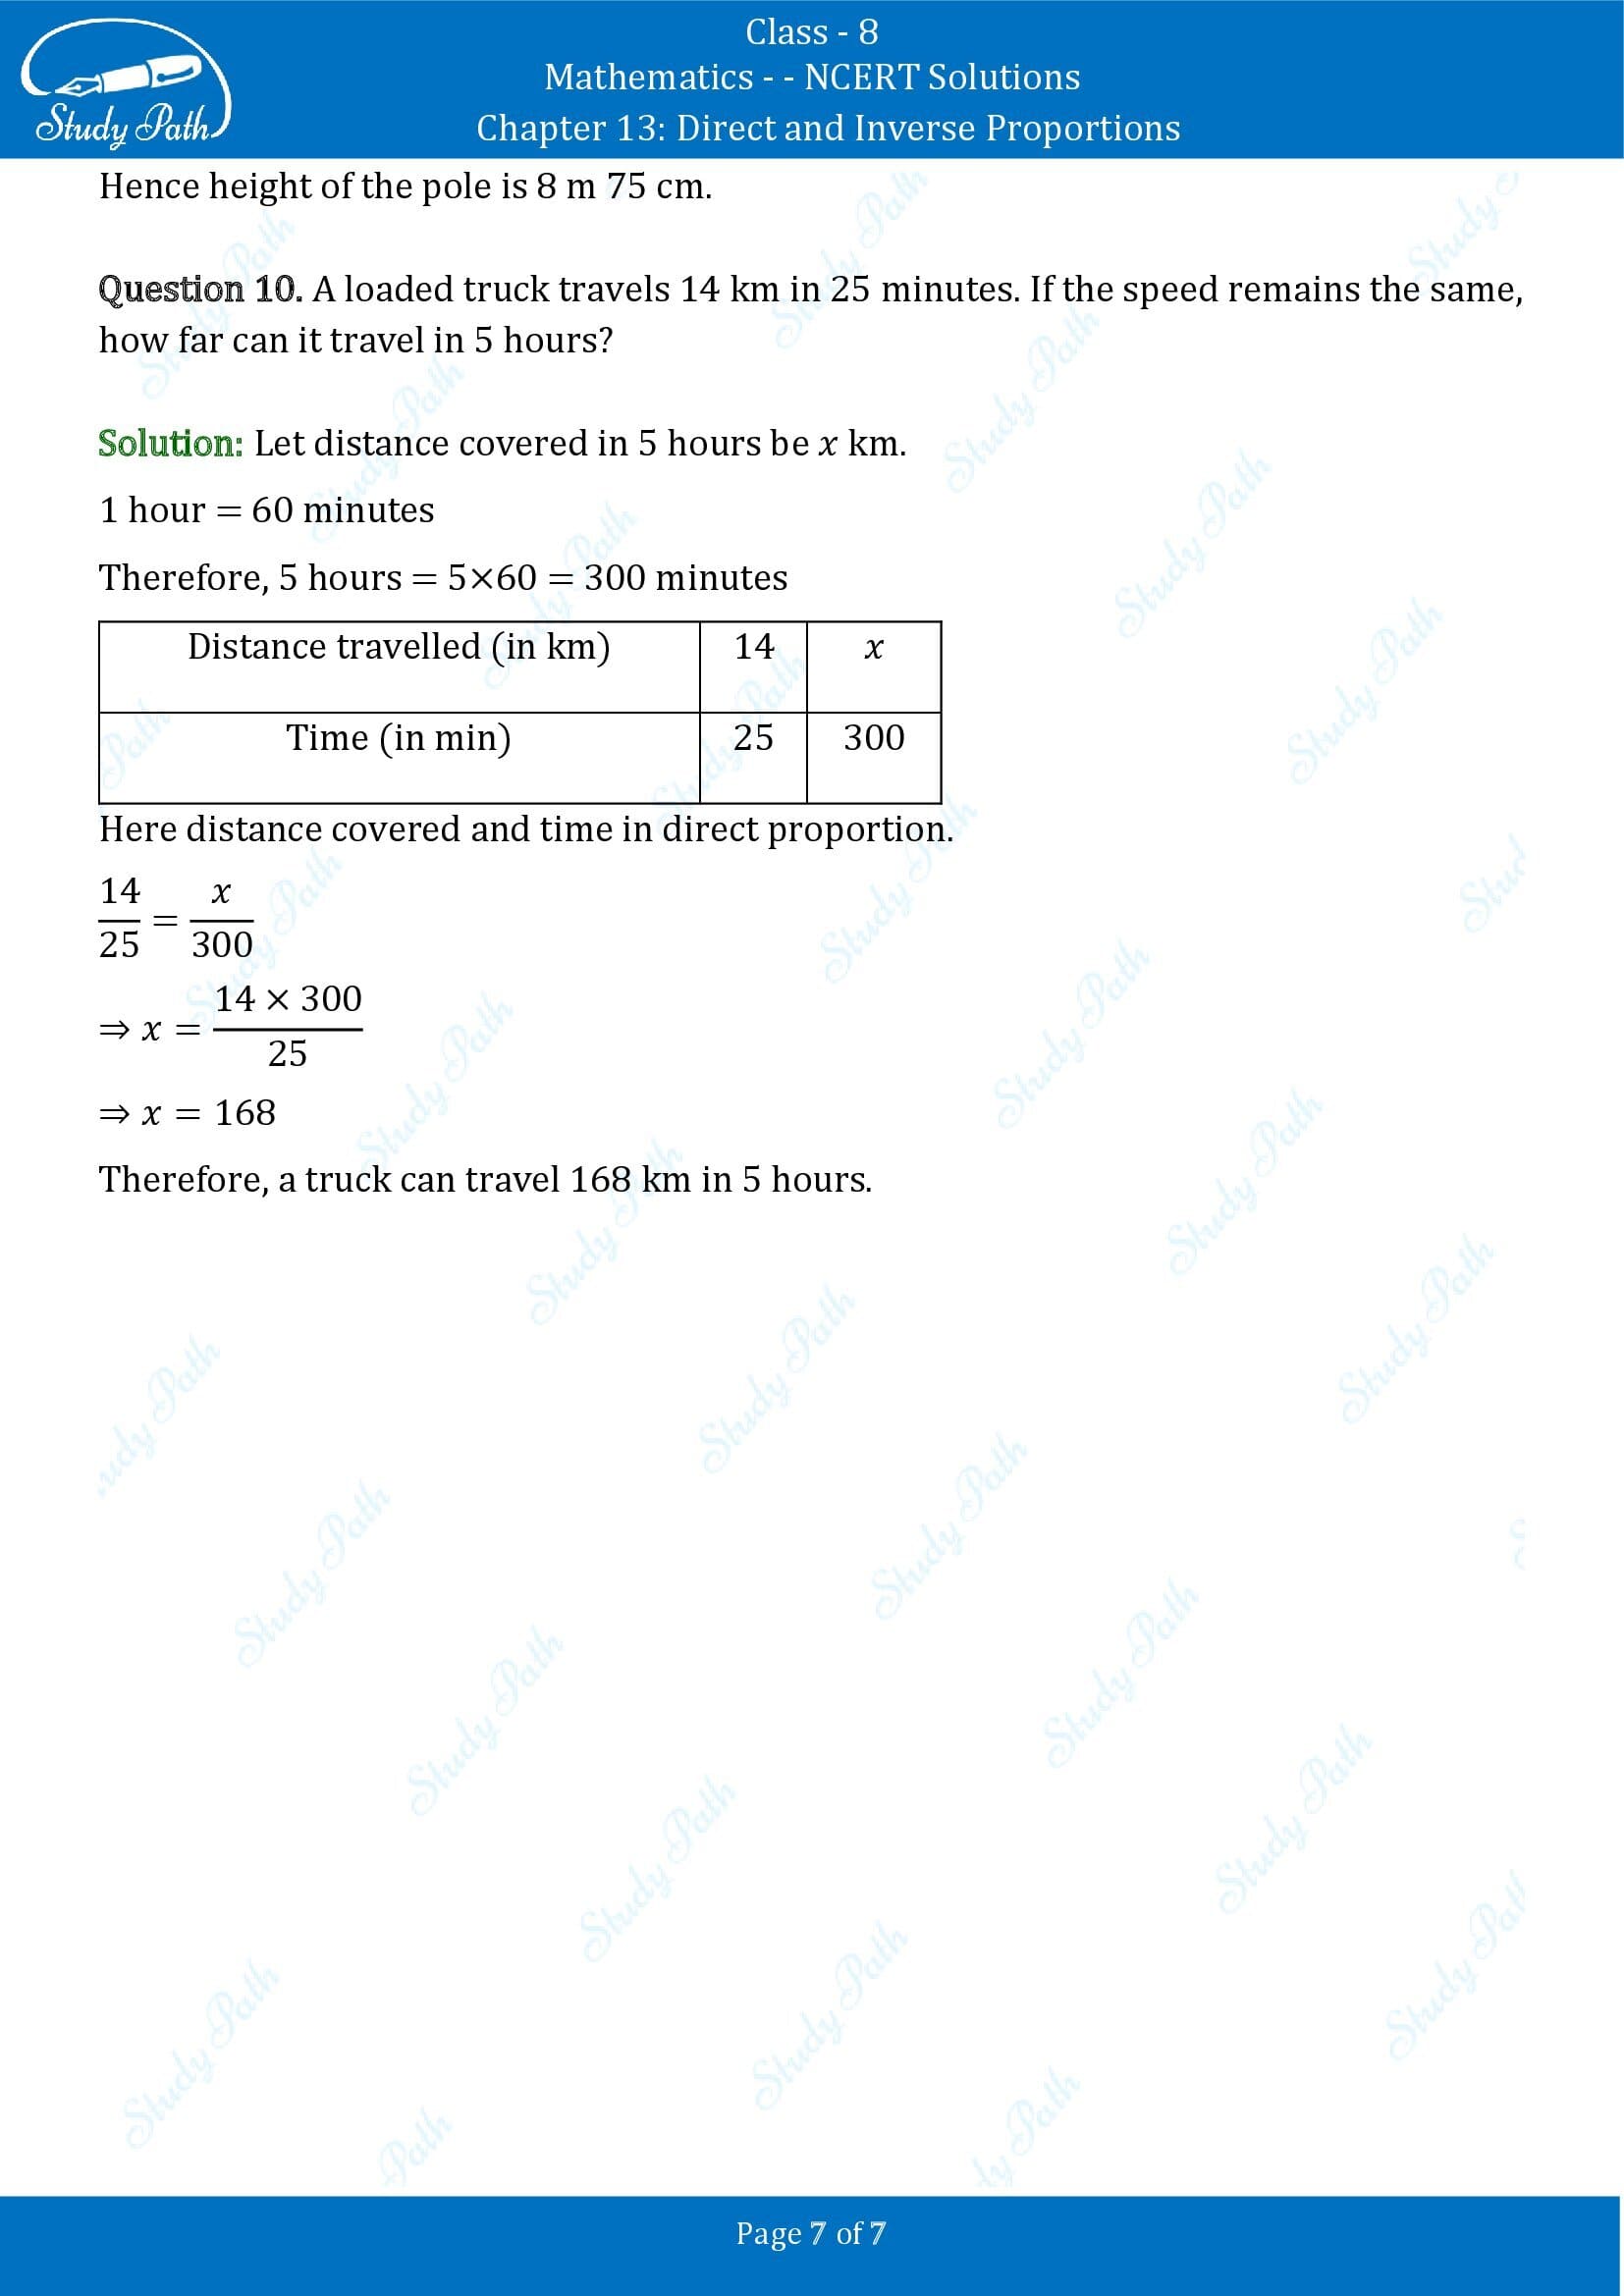 NCERT Solutions for Class 8 Maths Chapter 13 Direct and Inverse Proportions Exercise 13.1 00007